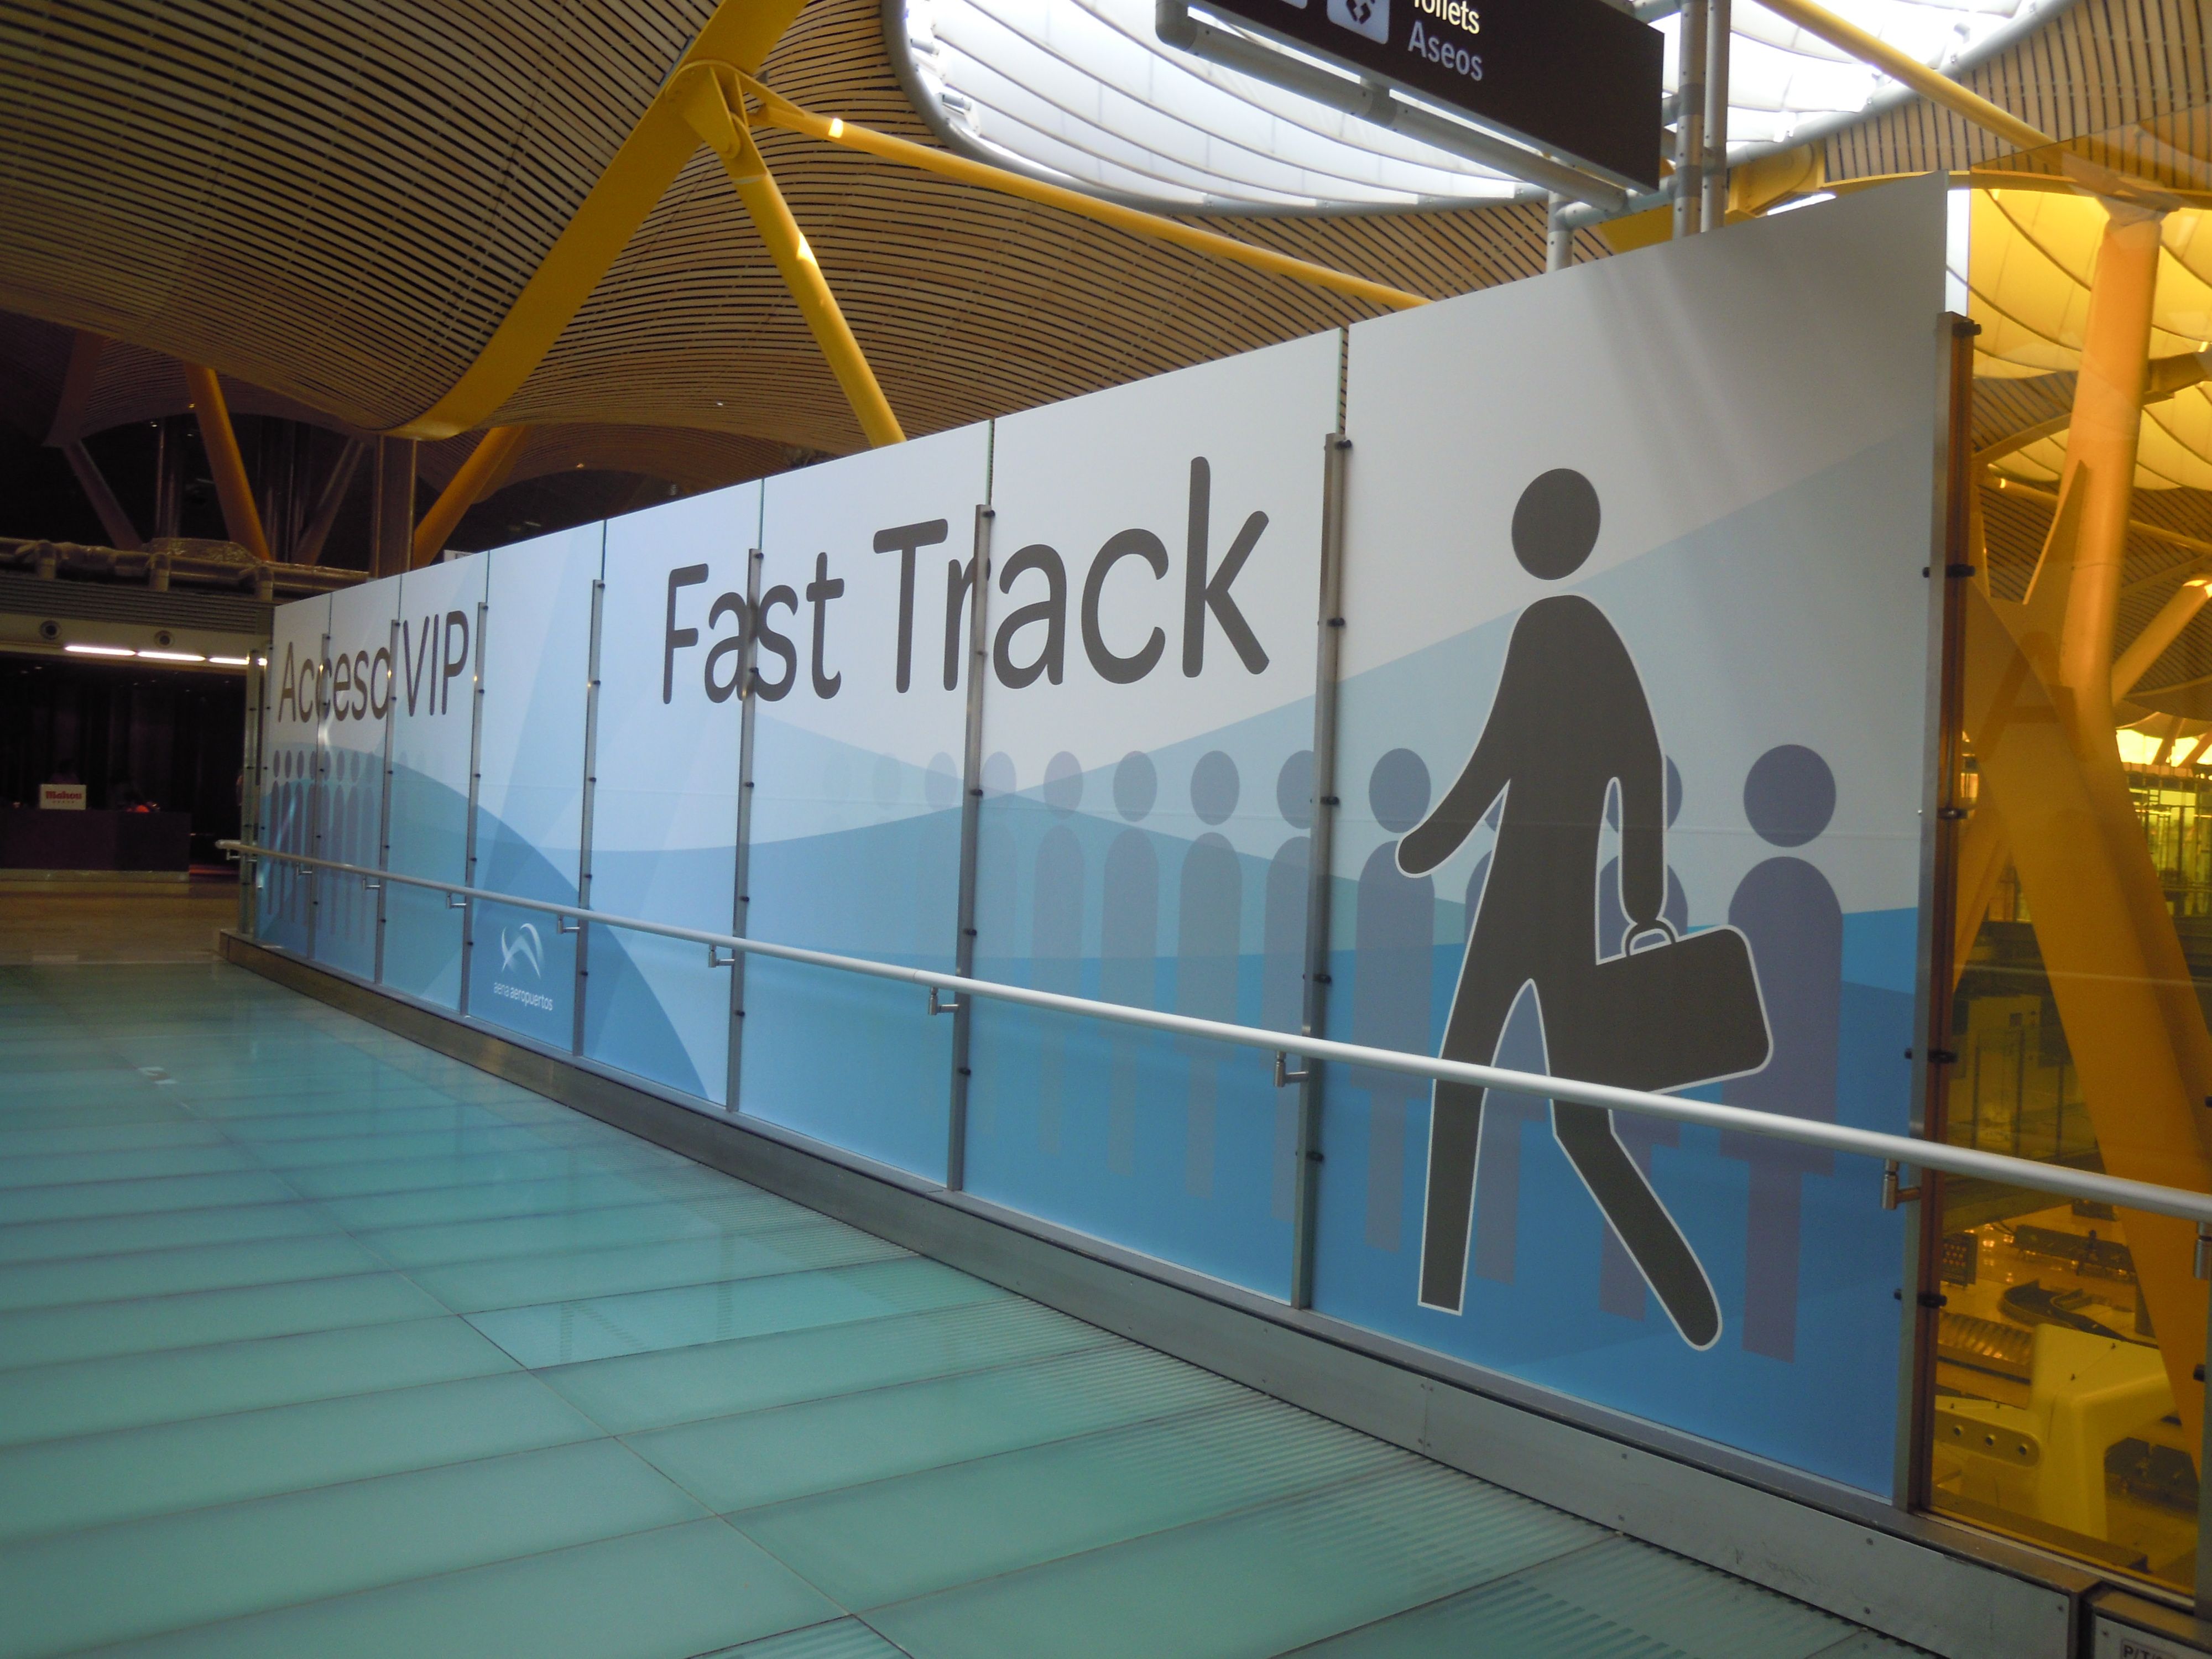 An airport security fast track sign.